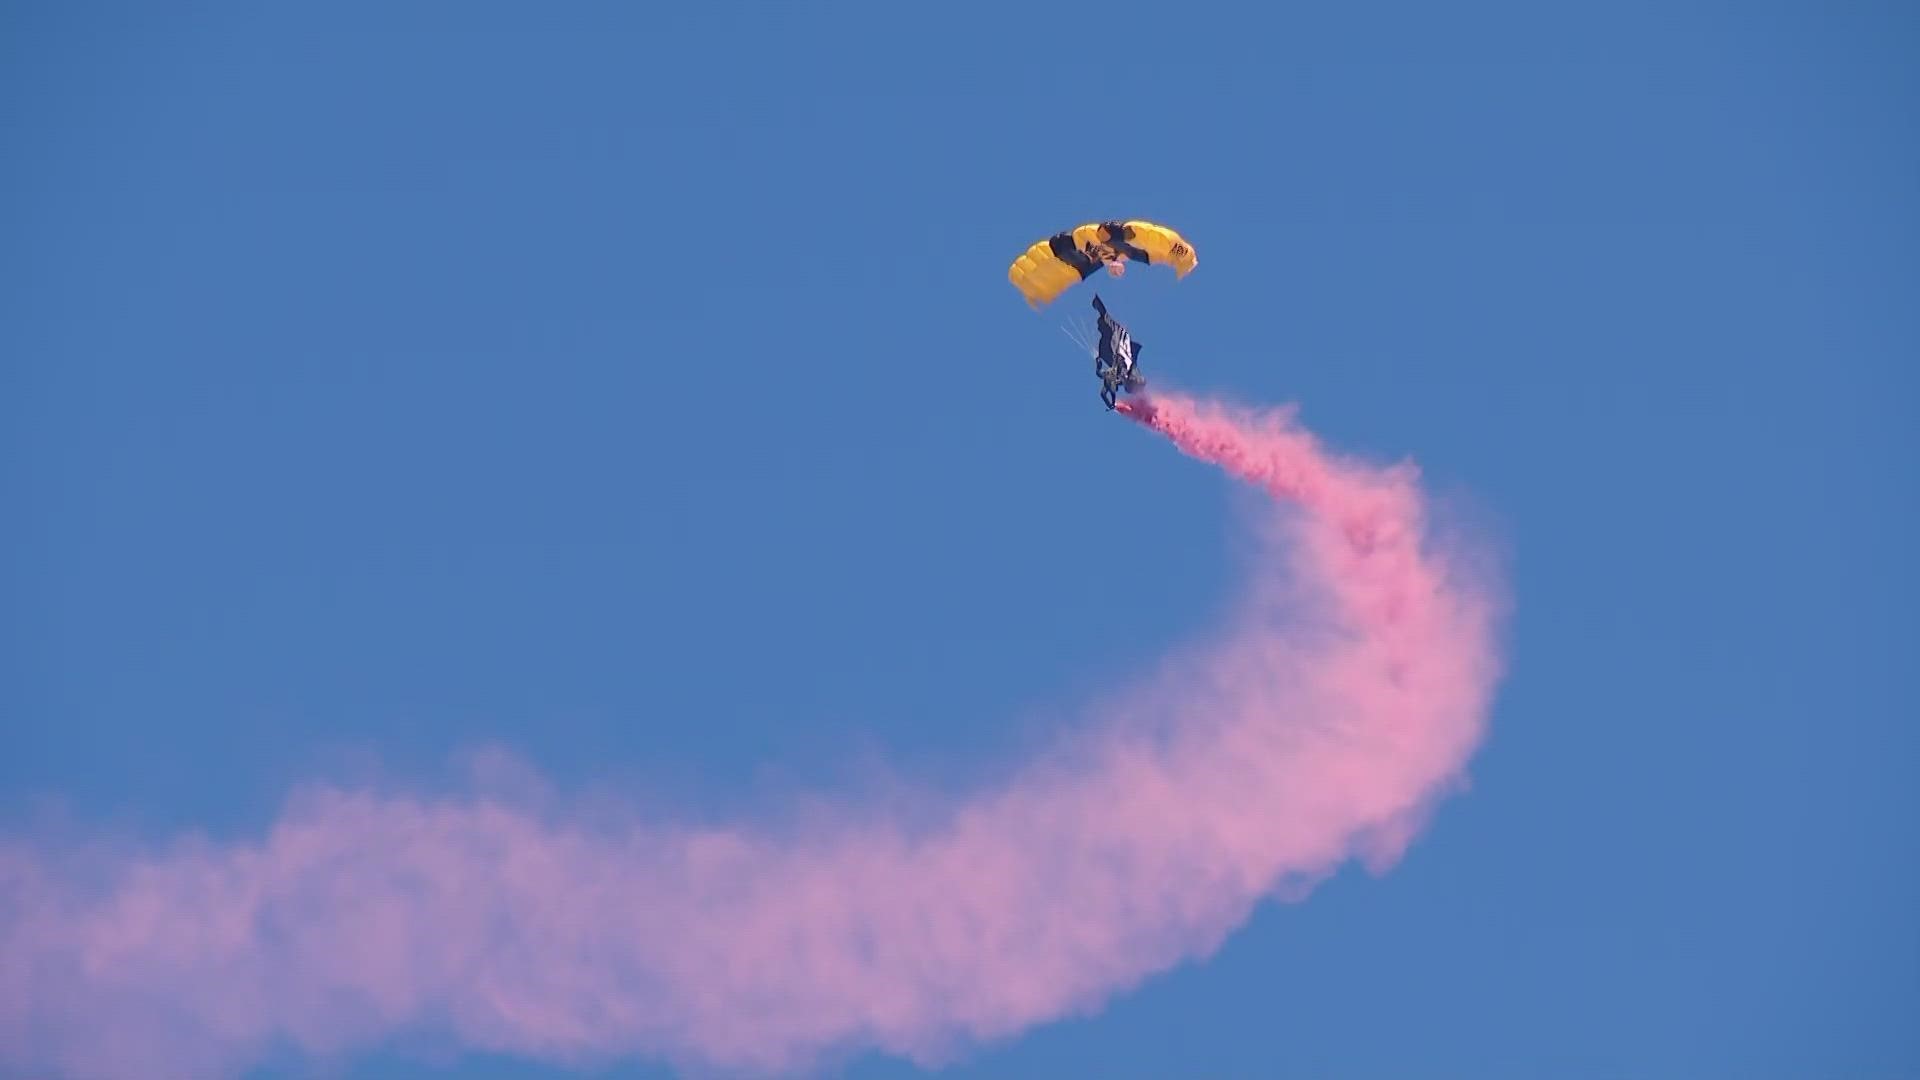 The United States Army Parachute Team, the Golden Knights, are in San Diego!